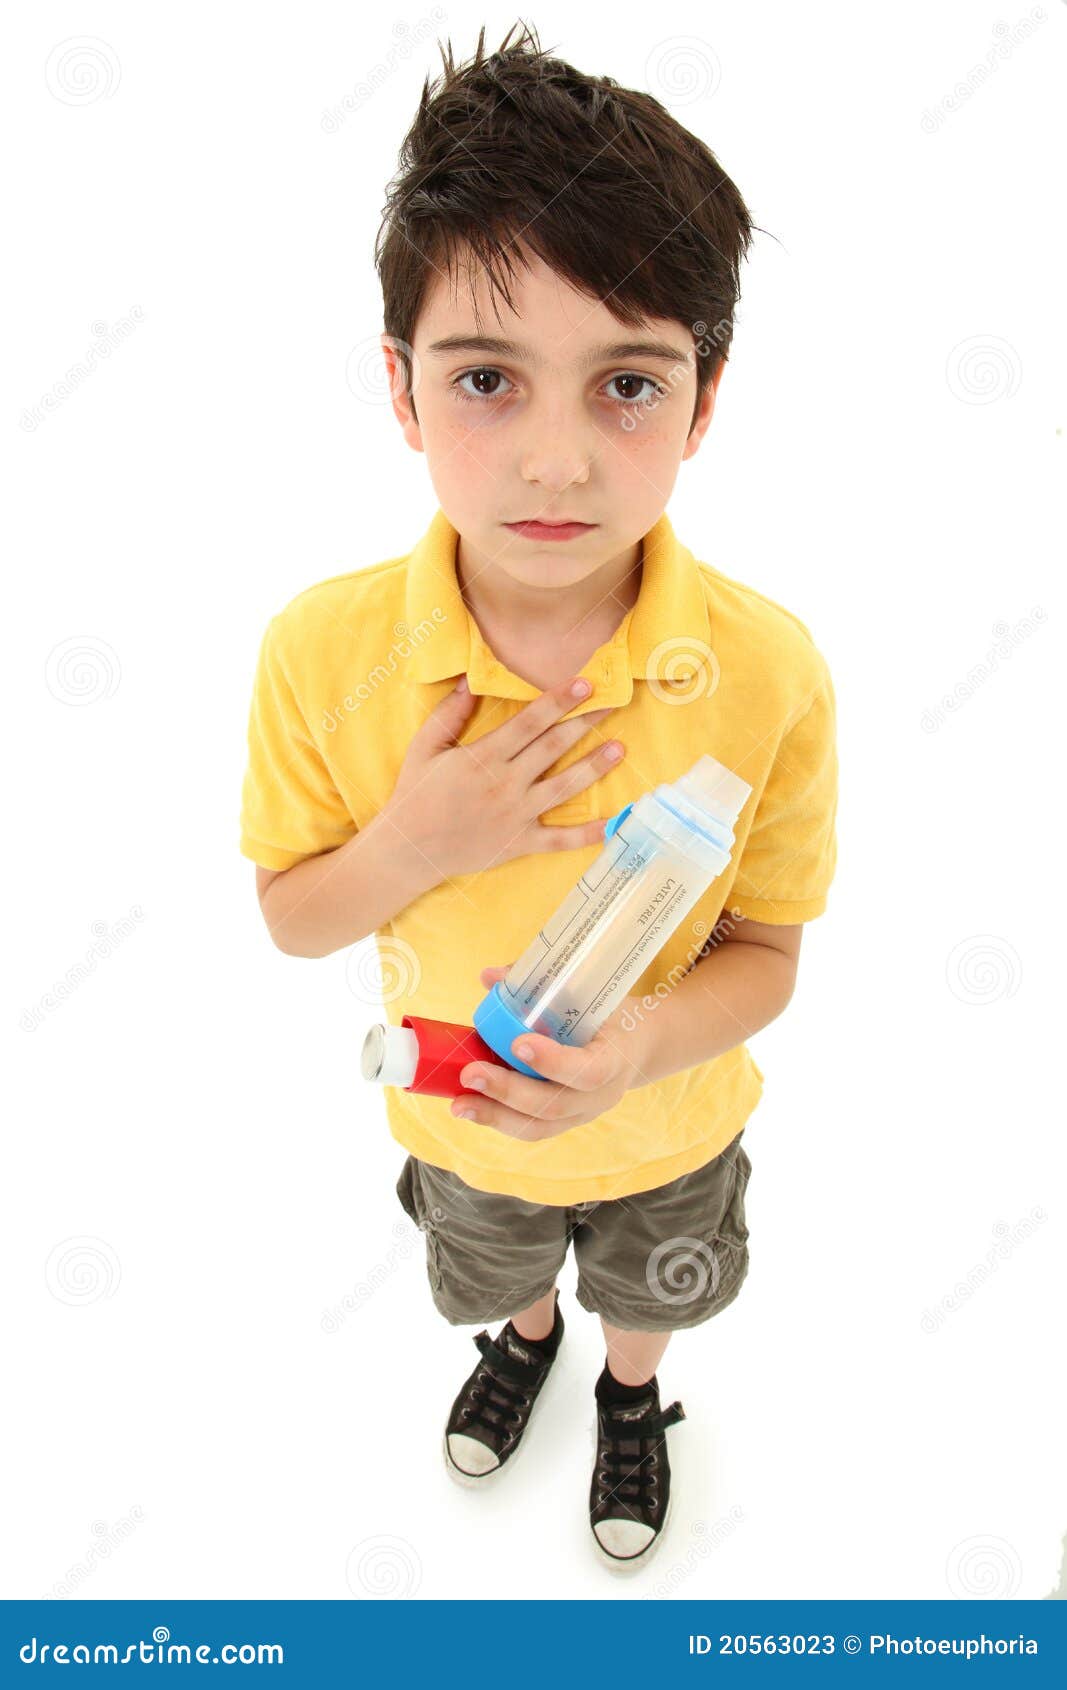 asthmatic child with inhaler and spacer chamber